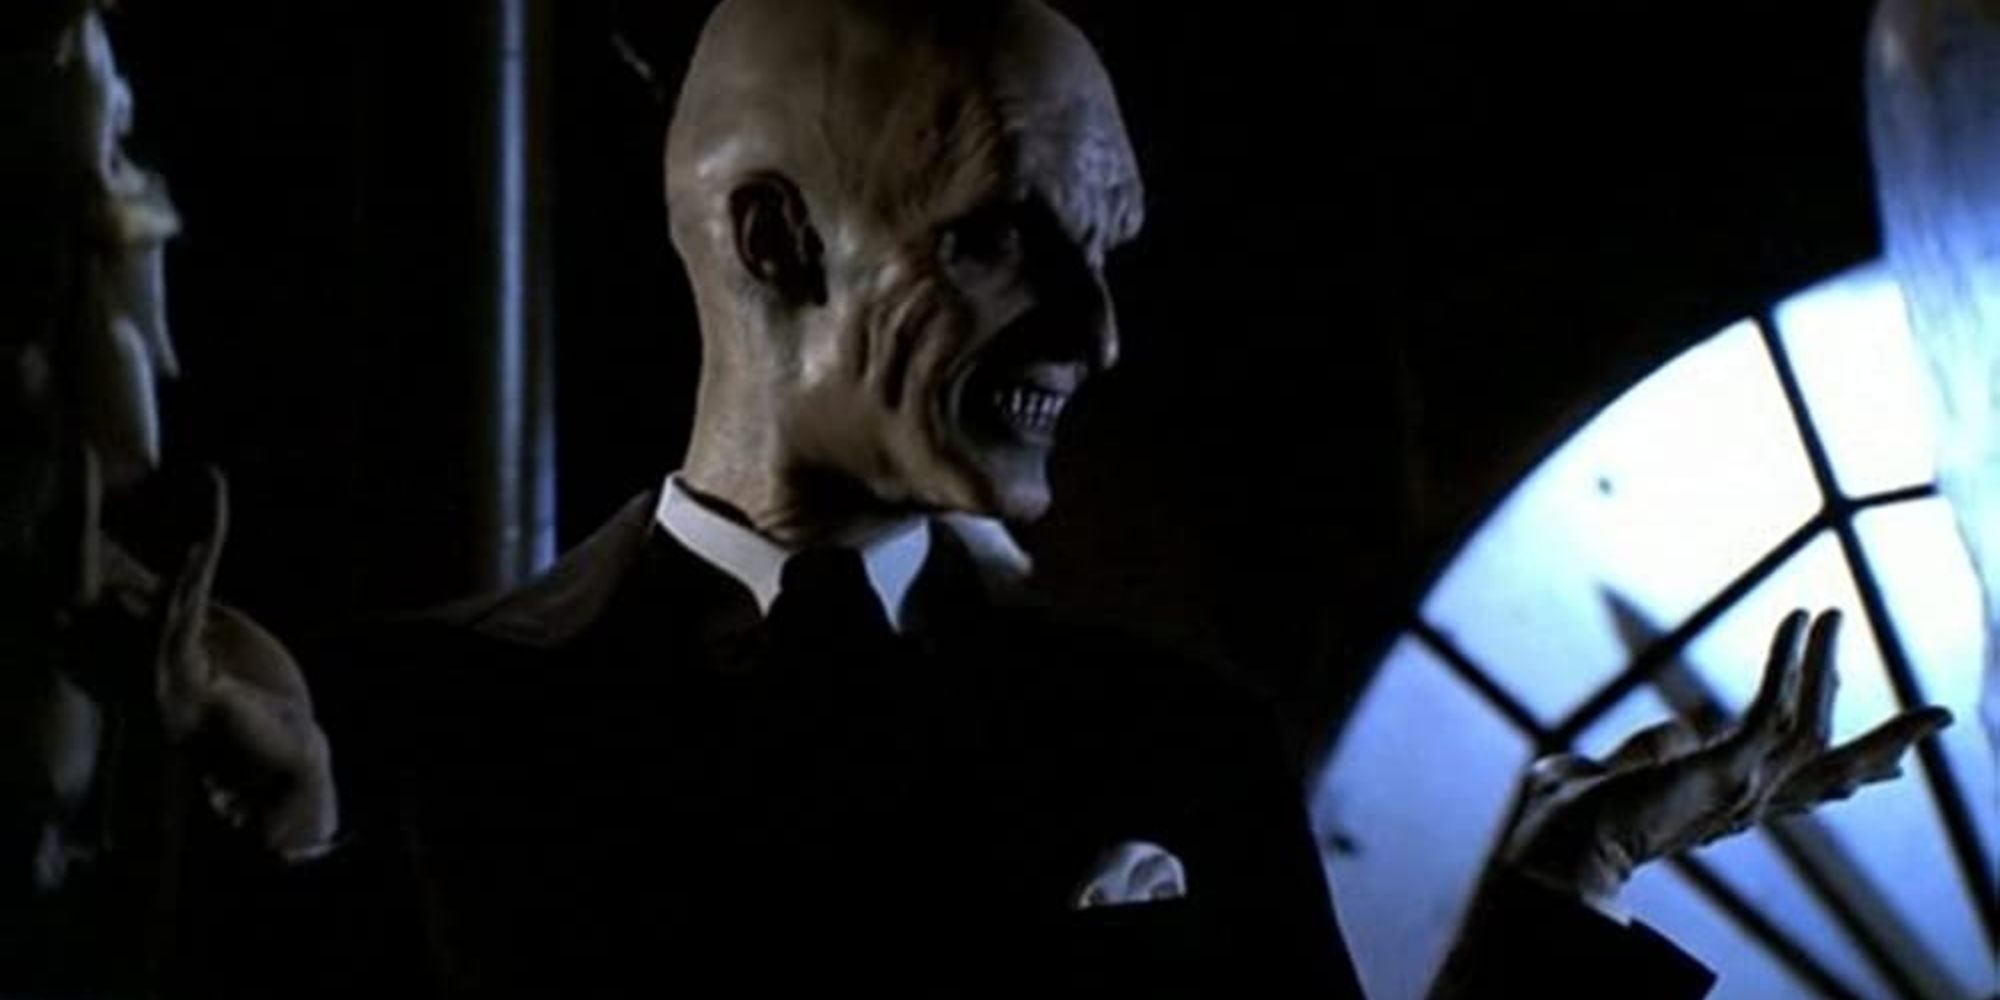 A gentleman smiles in the episode 'Hush', Buffy the Vampire Slayer